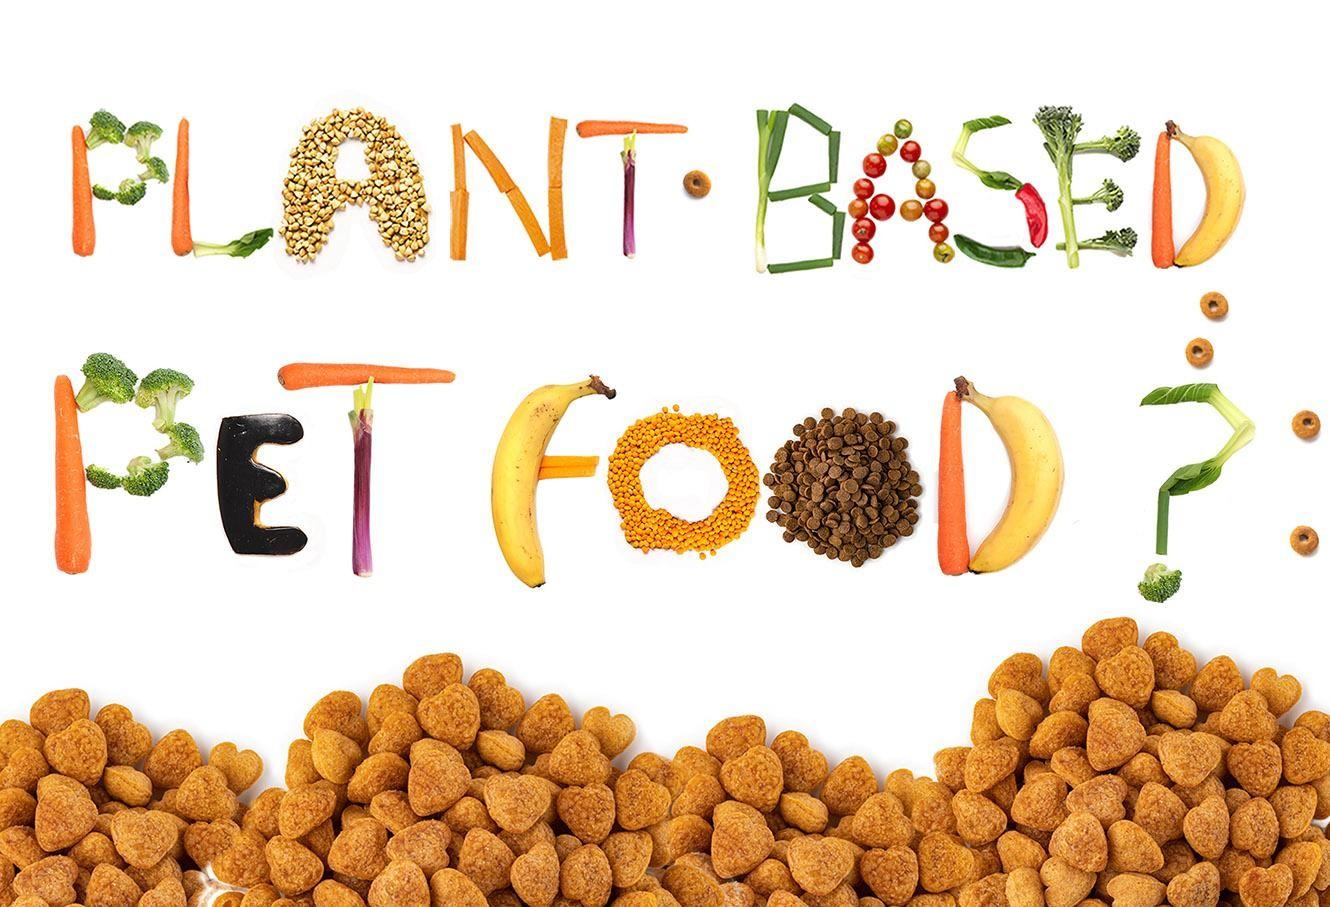 Plant-based Pet Food, from myth to reality: is it a viable product?